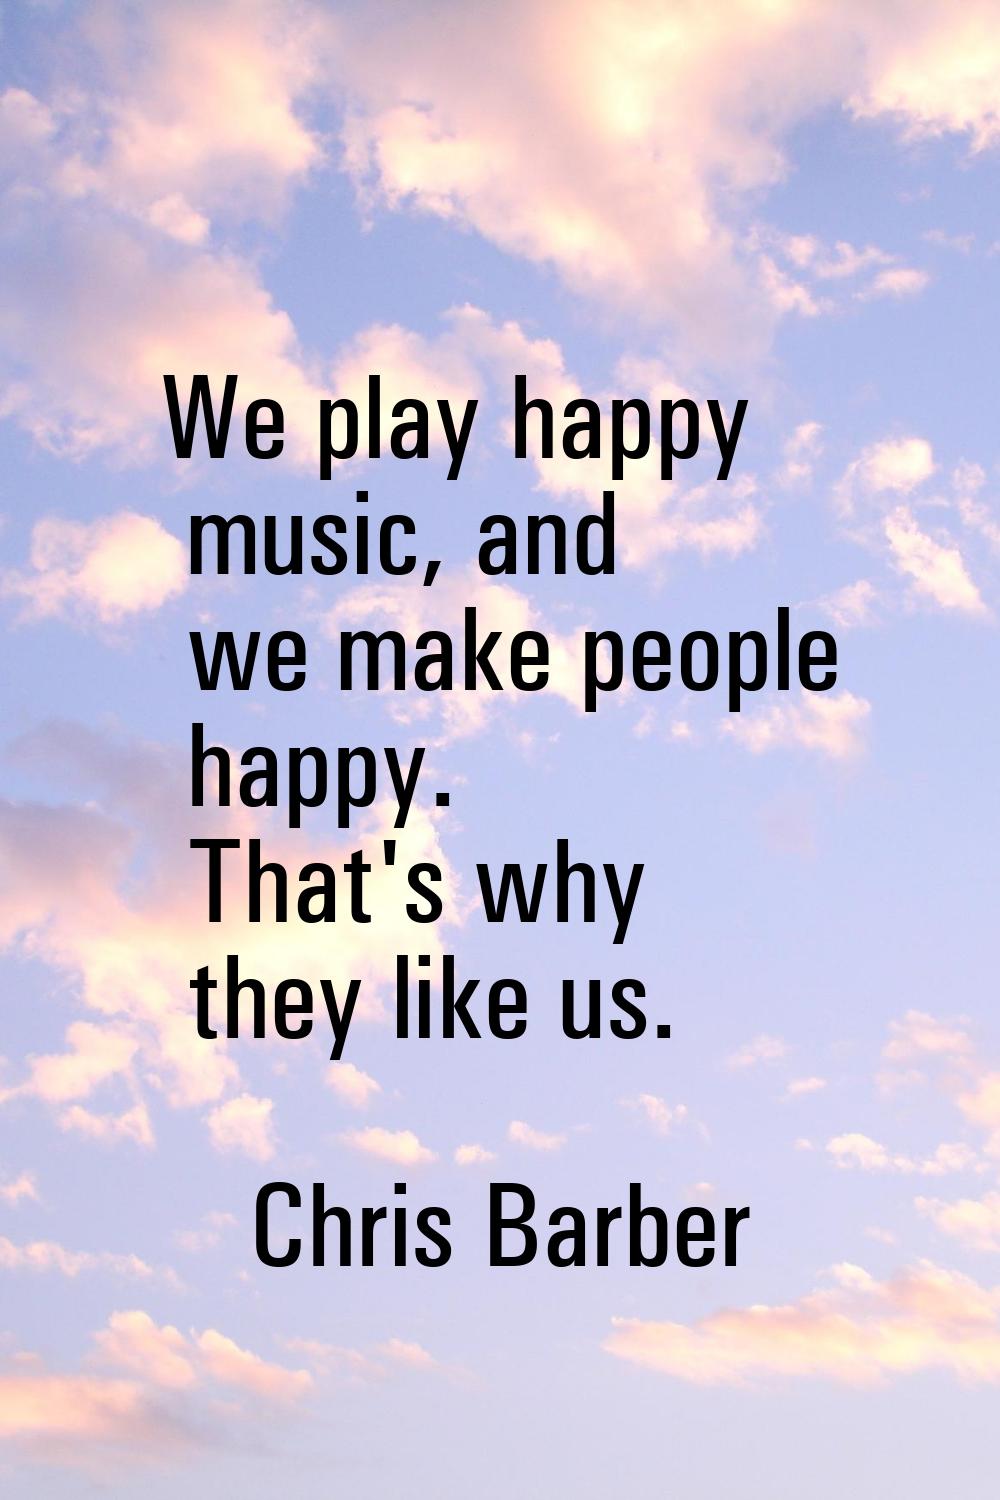 We play happy music, and we make people happy. That's why they like us.